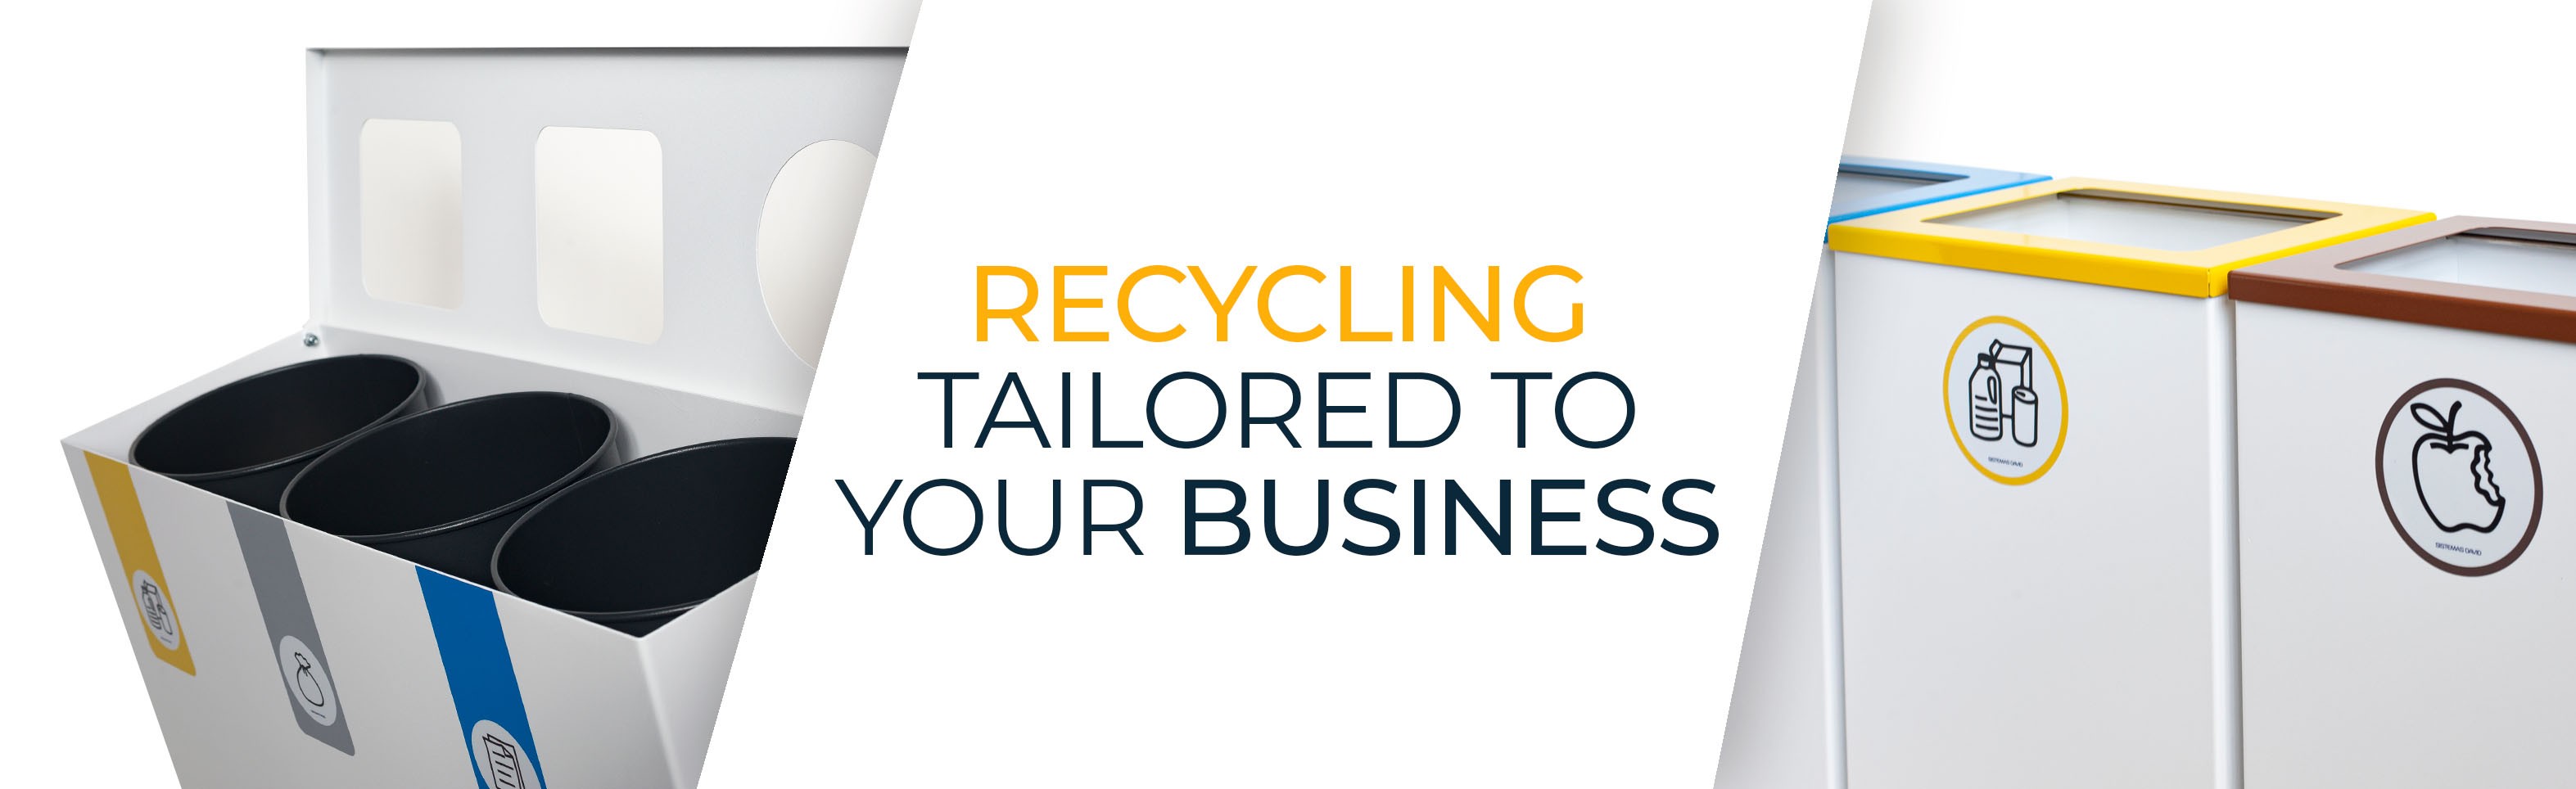 Recycling tailored to your business